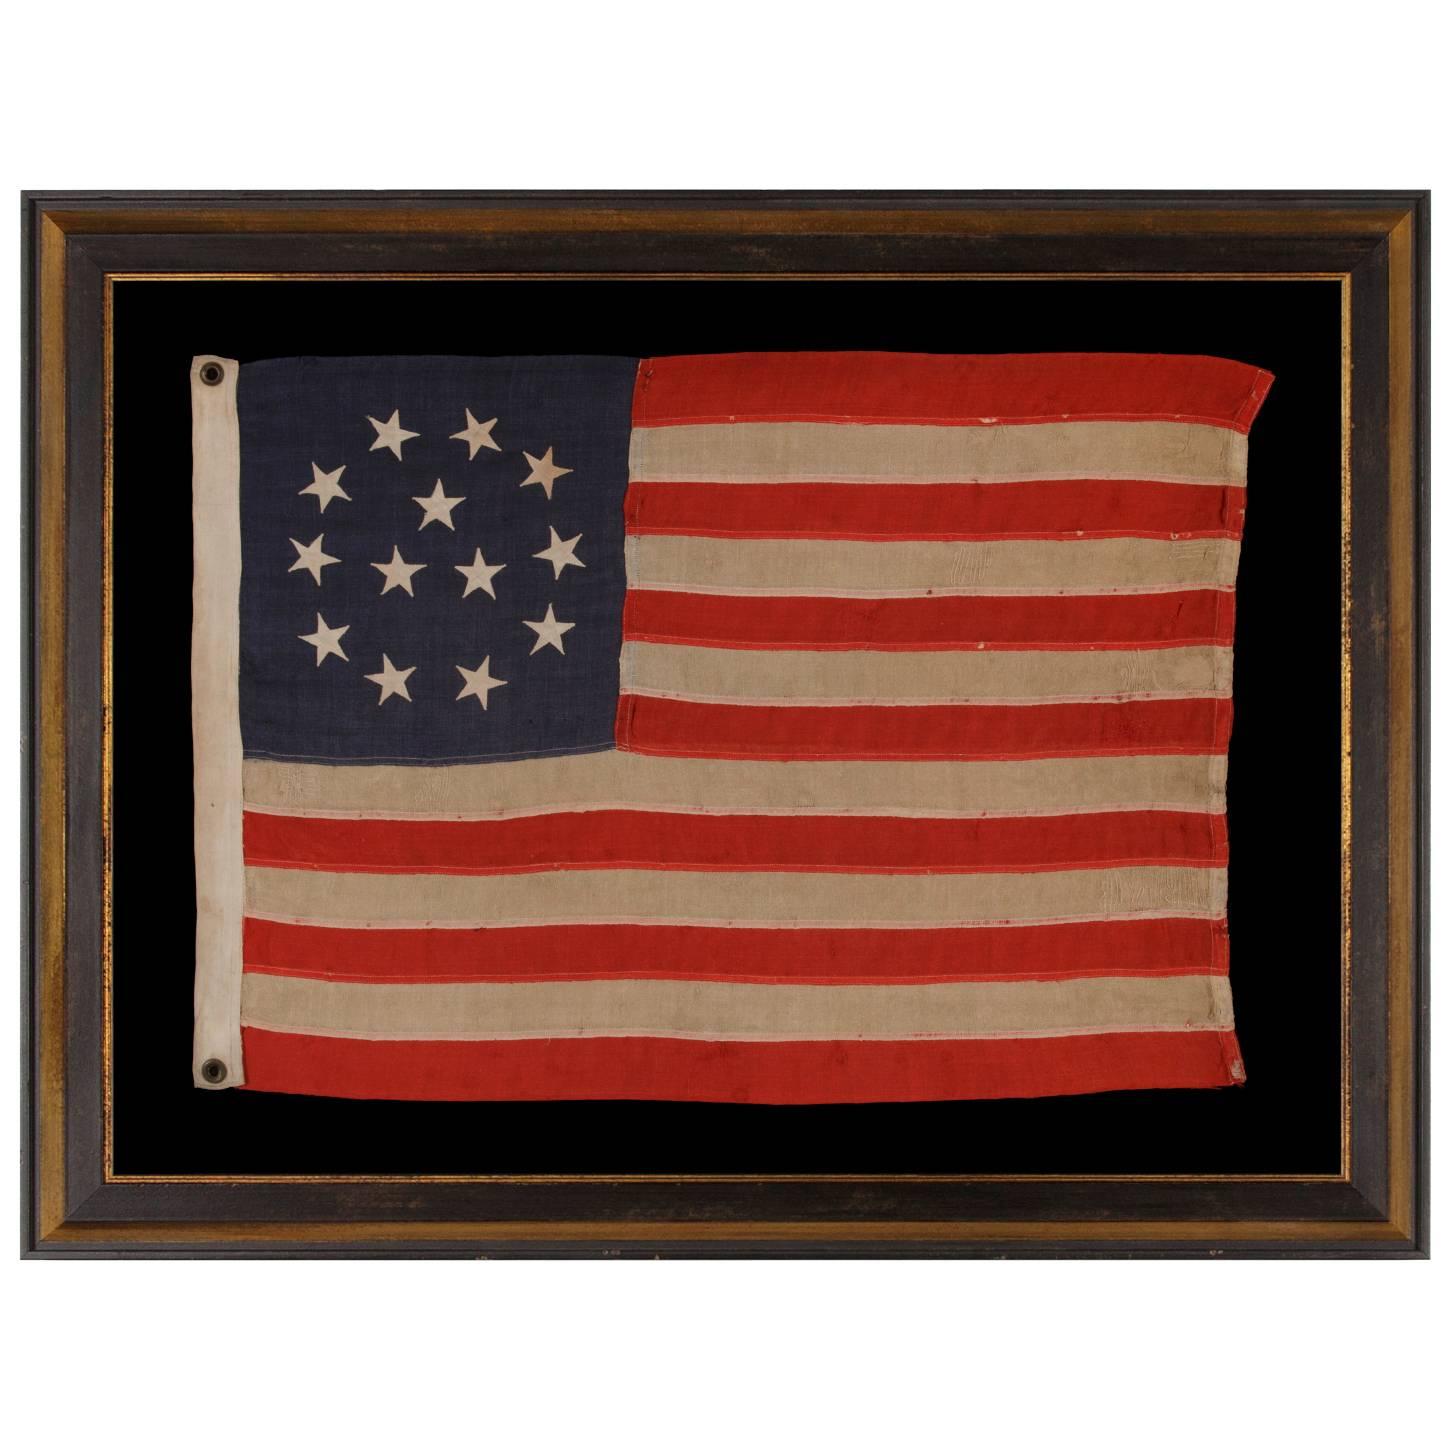 Extremely Rare 13 Star Flag with Stars in Wreath Pattern with Three Center Star